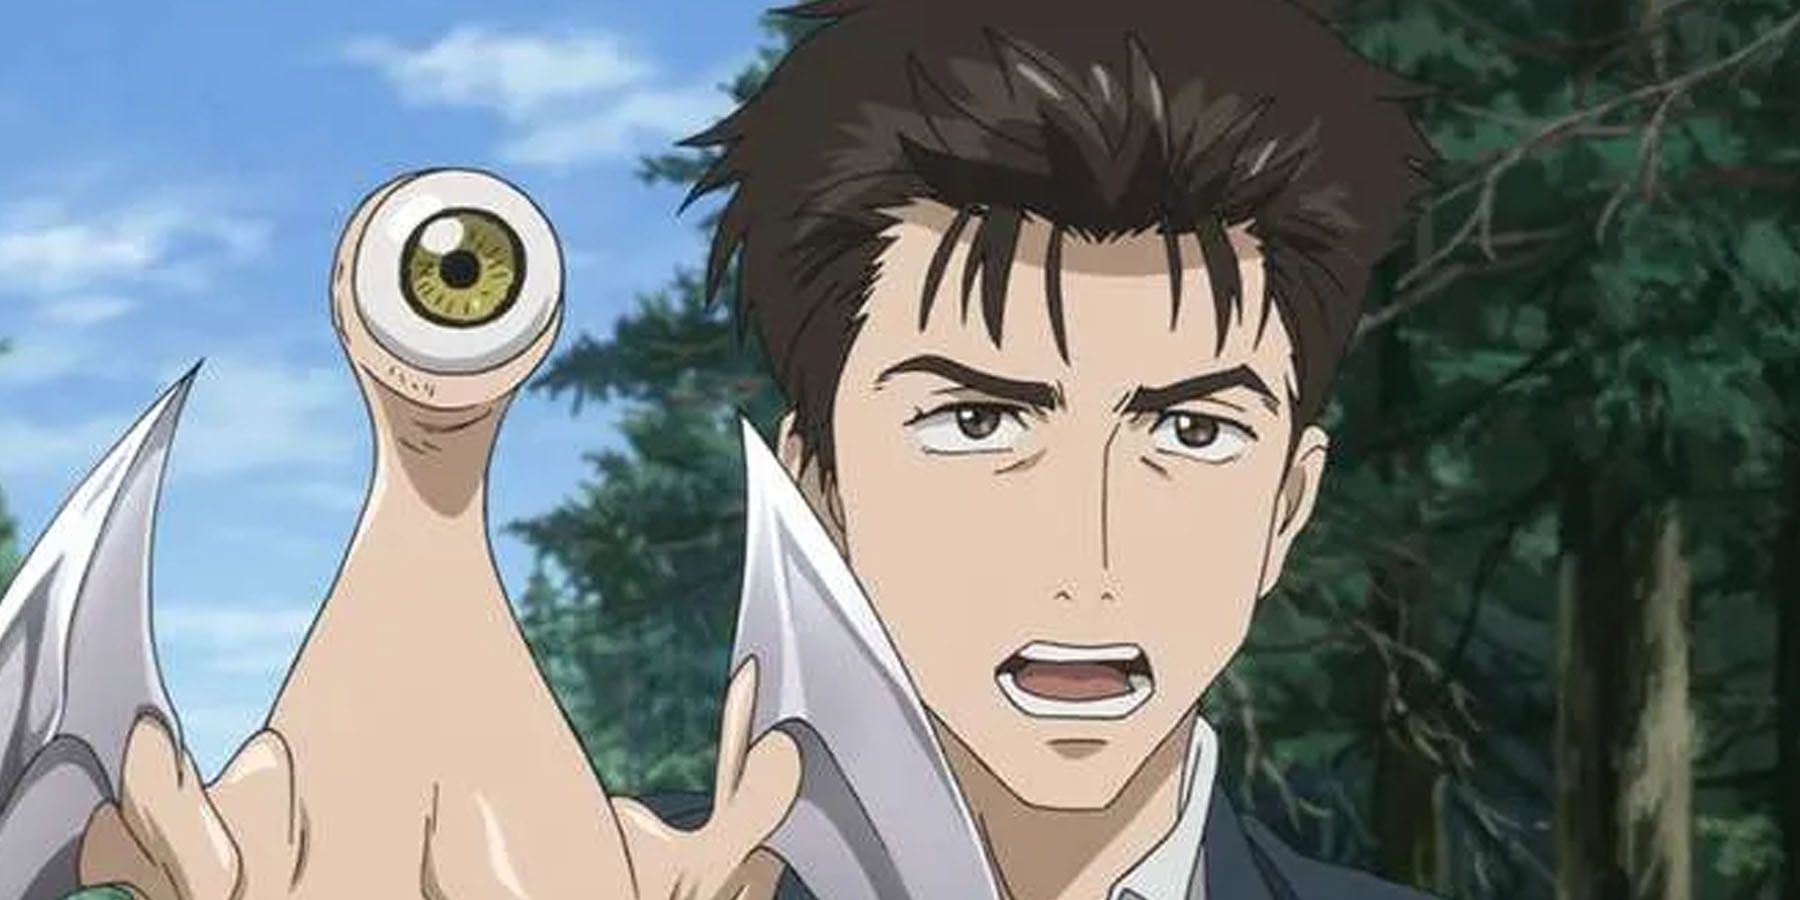 Parasyte Anime Is Getting A South-Korean Live Action Adaptation